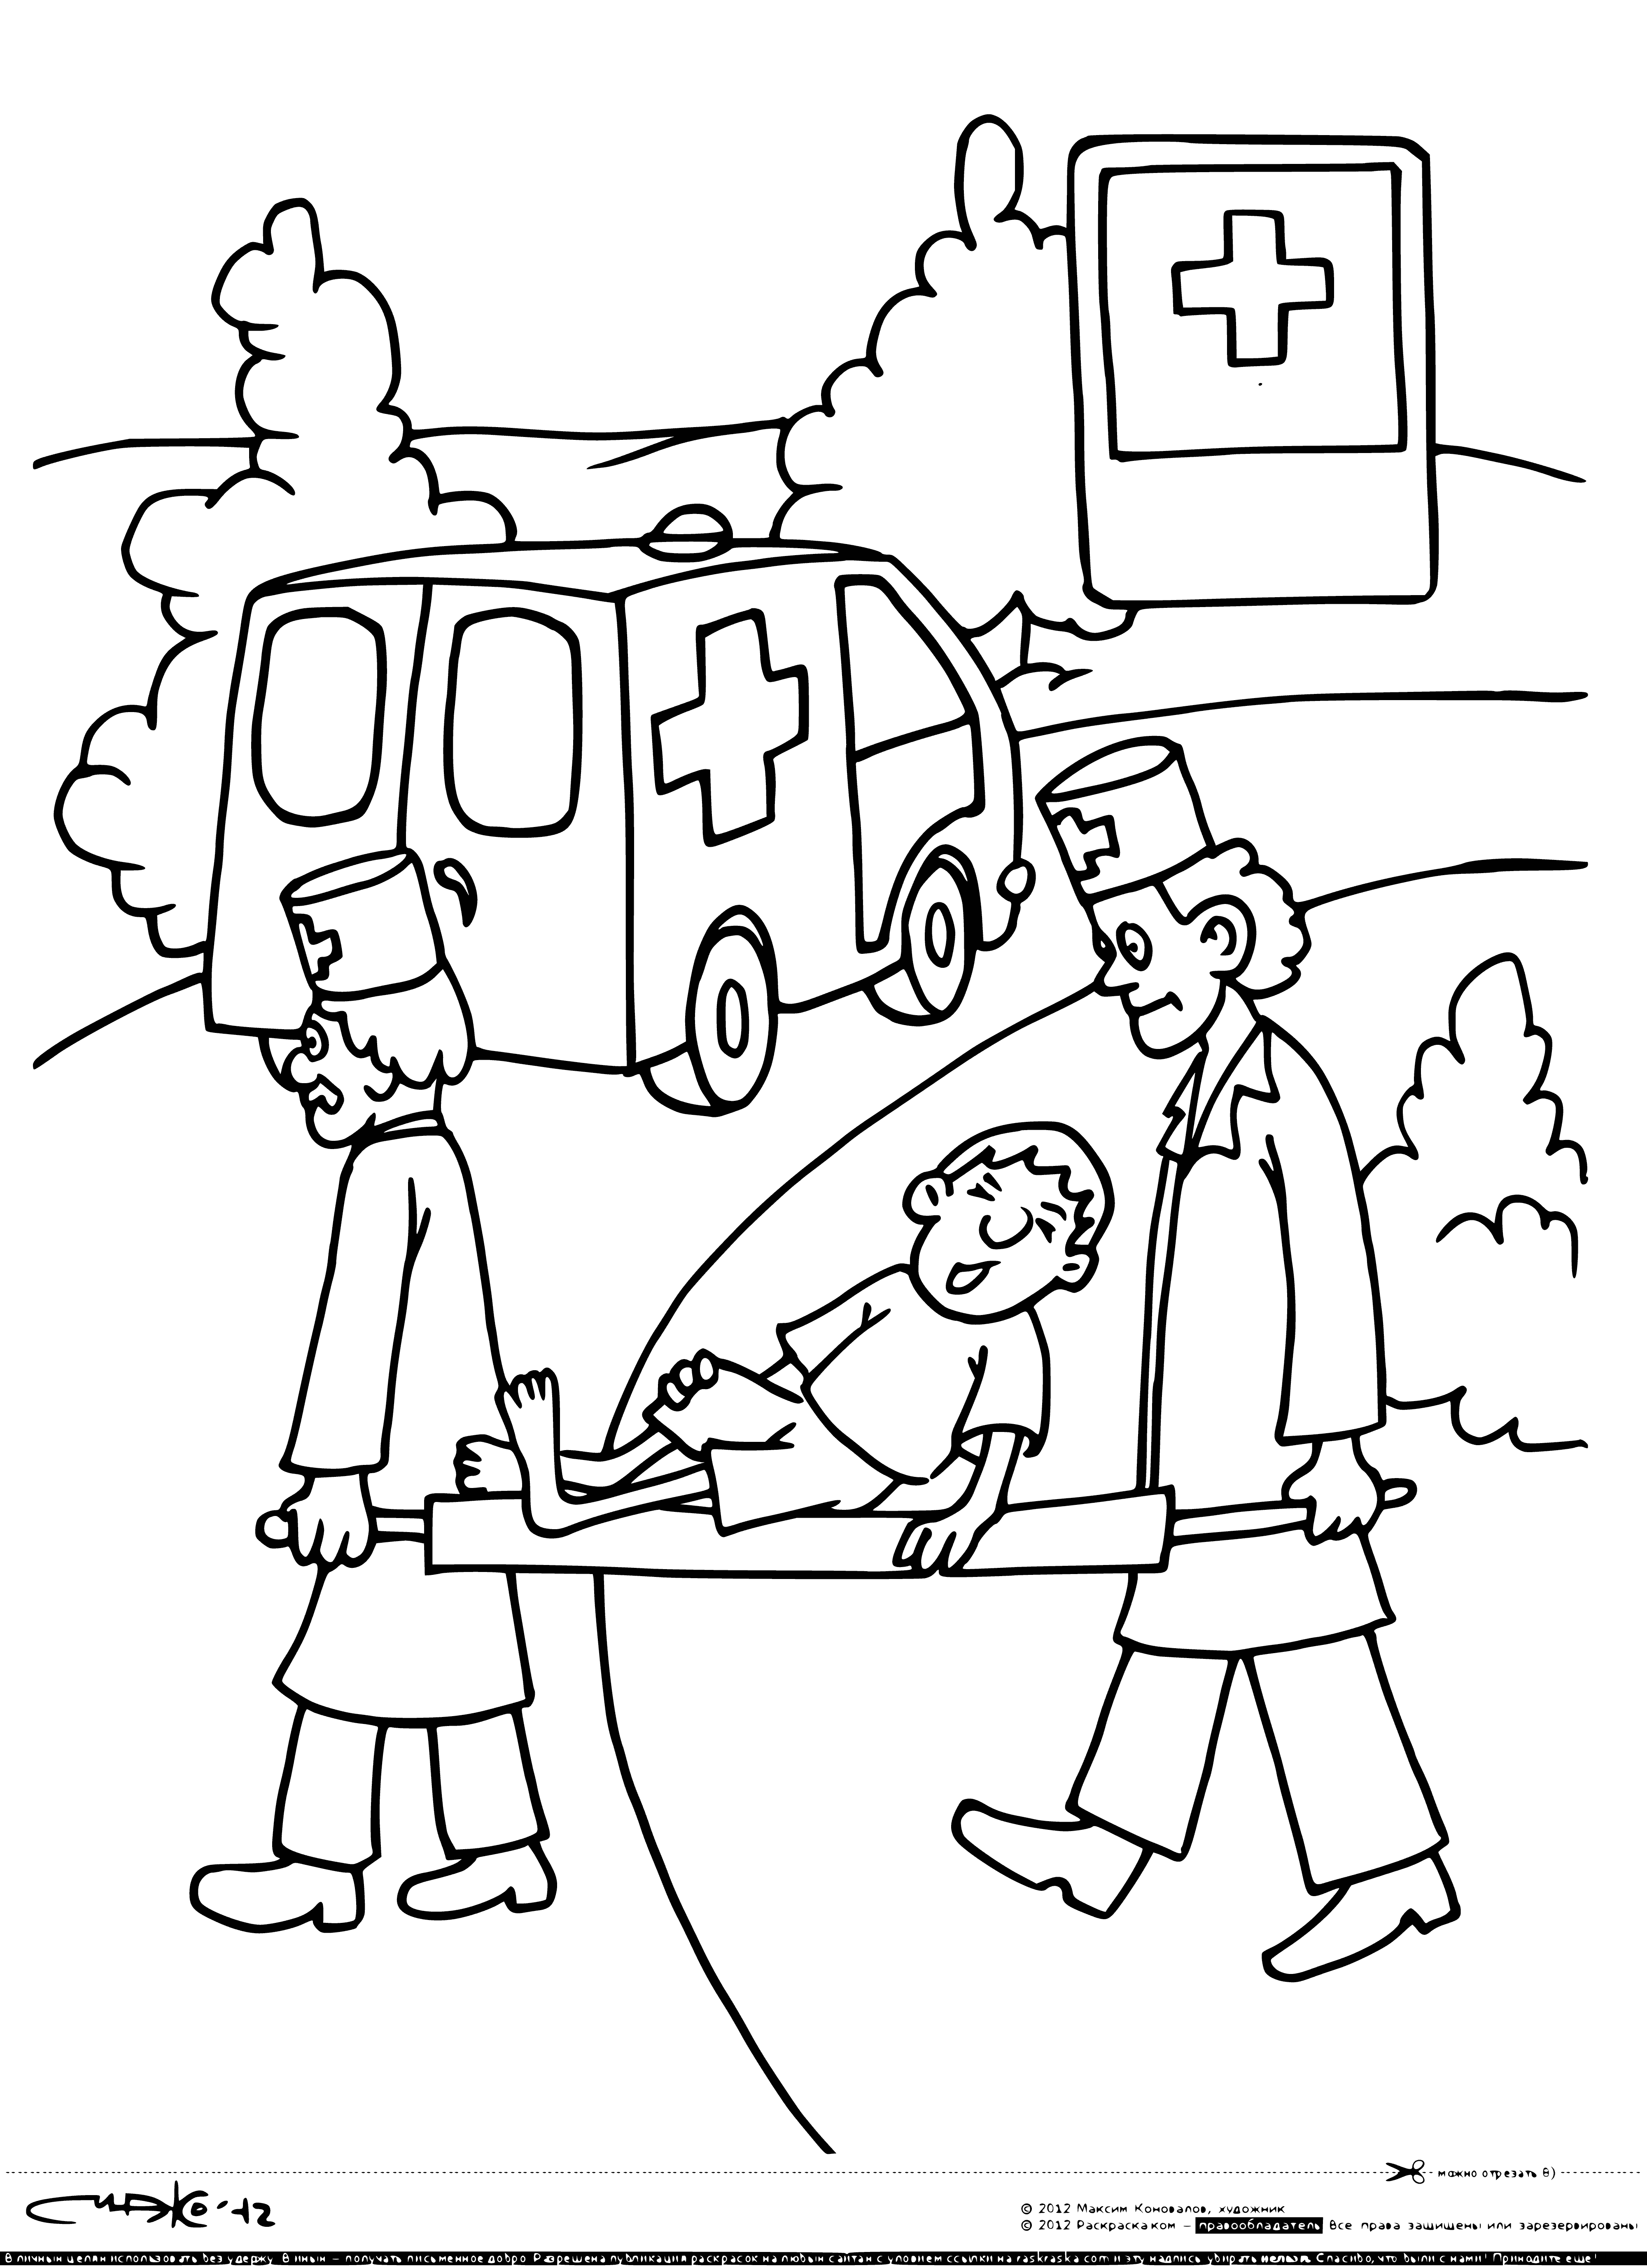 coloring page: Blue sign with white cross: "MEDICAL" above, "CENTER" below.